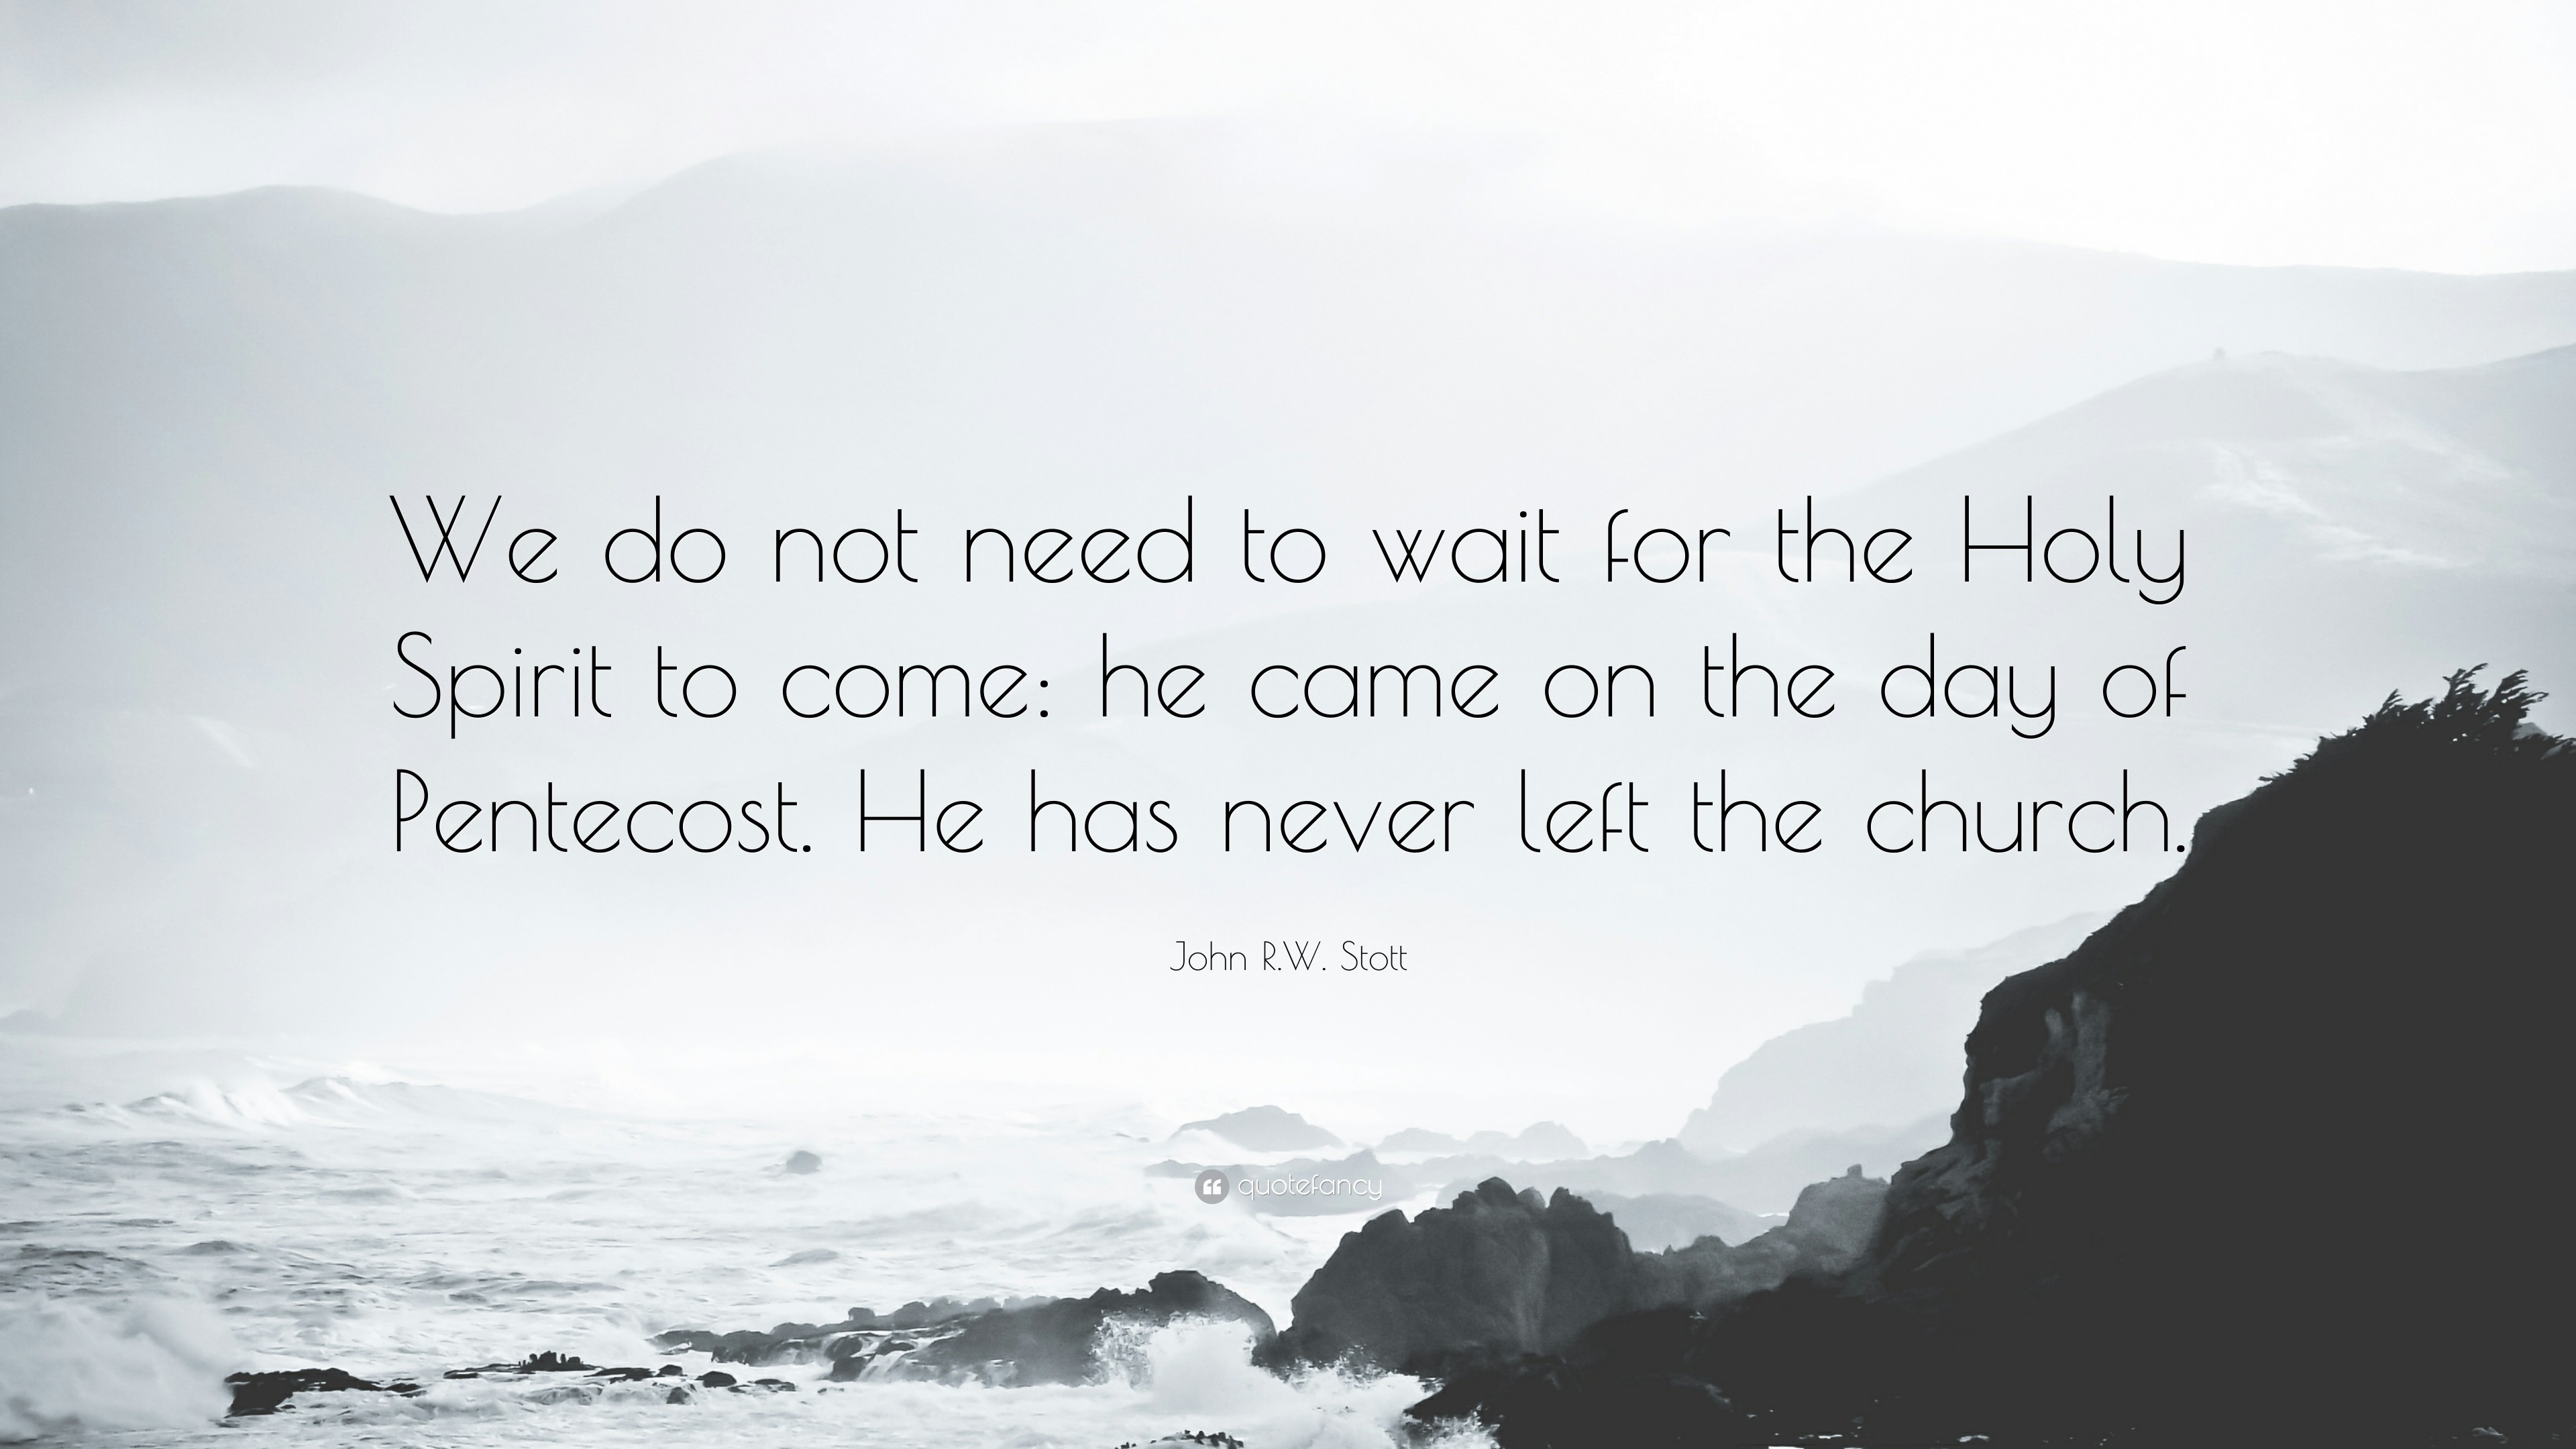 3840x2160 John R.W. Stott Quote: “We do not need to wait for the Holy Spirit